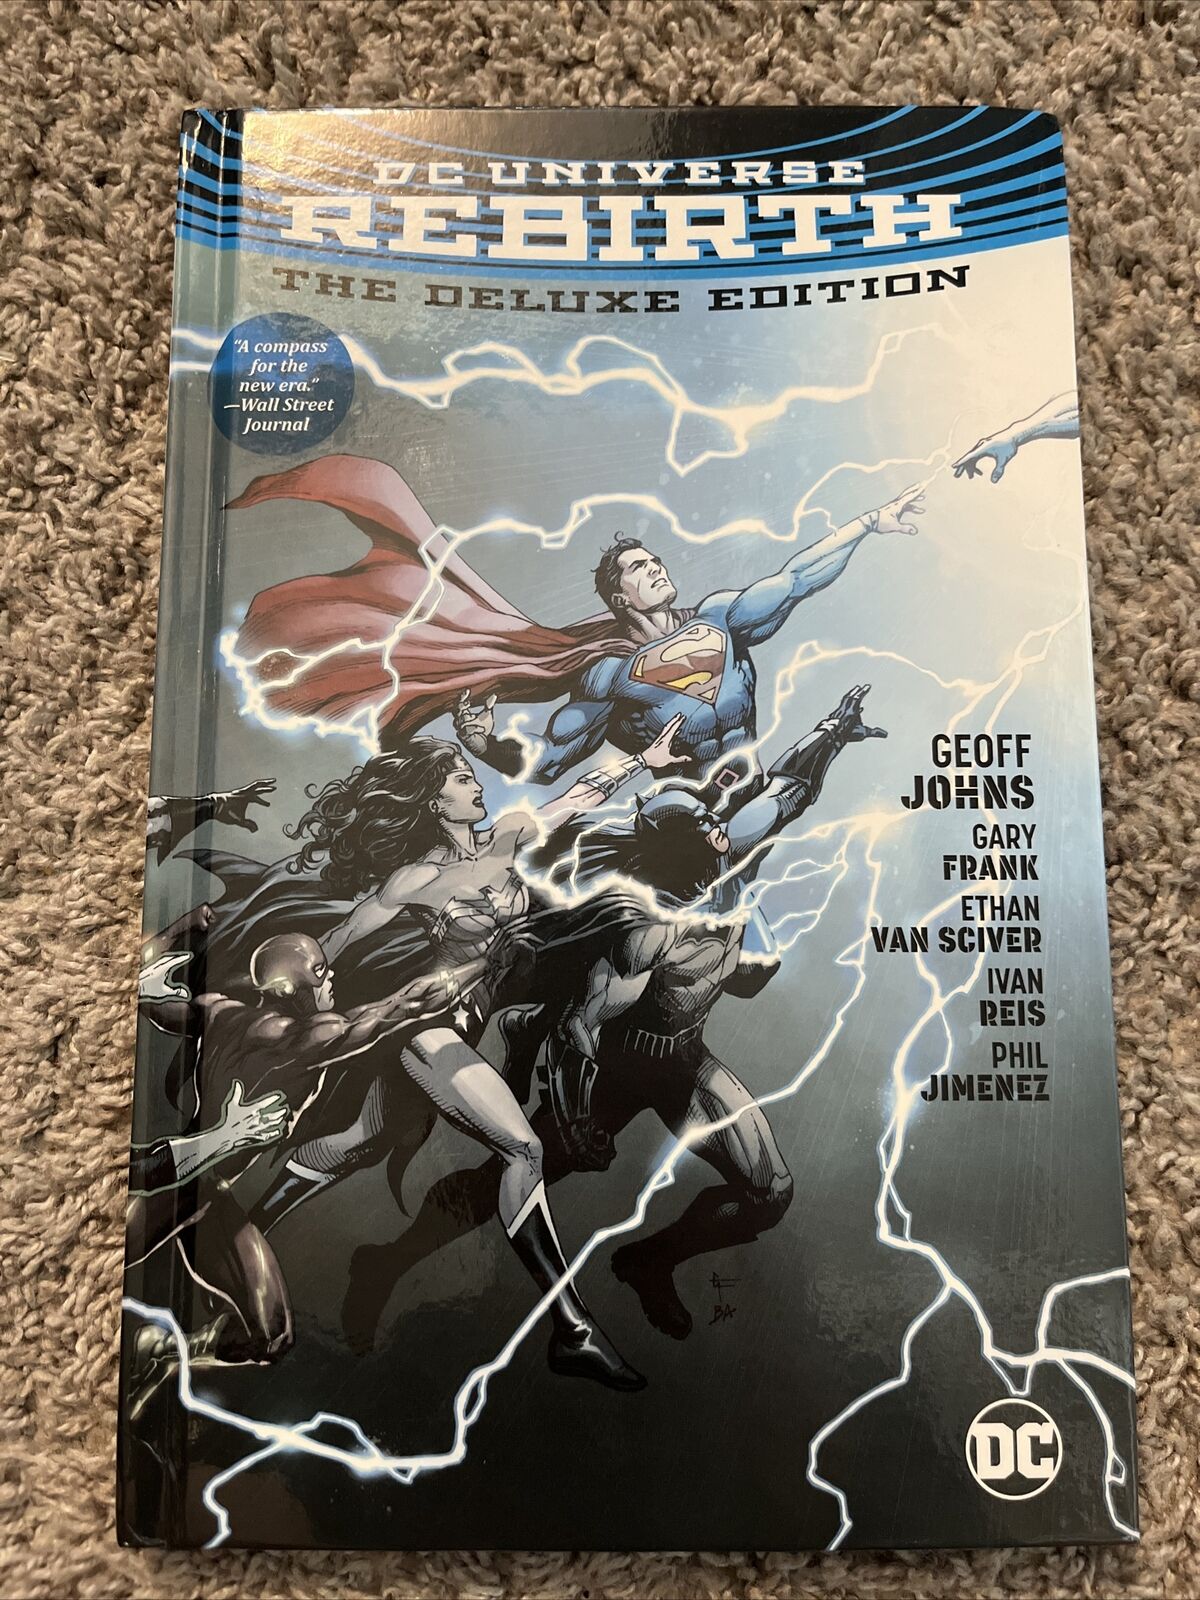 DC UNIVERSE - REBIRTH THE DELUXE EDITION - Graphic Novel Hard Cover NEW